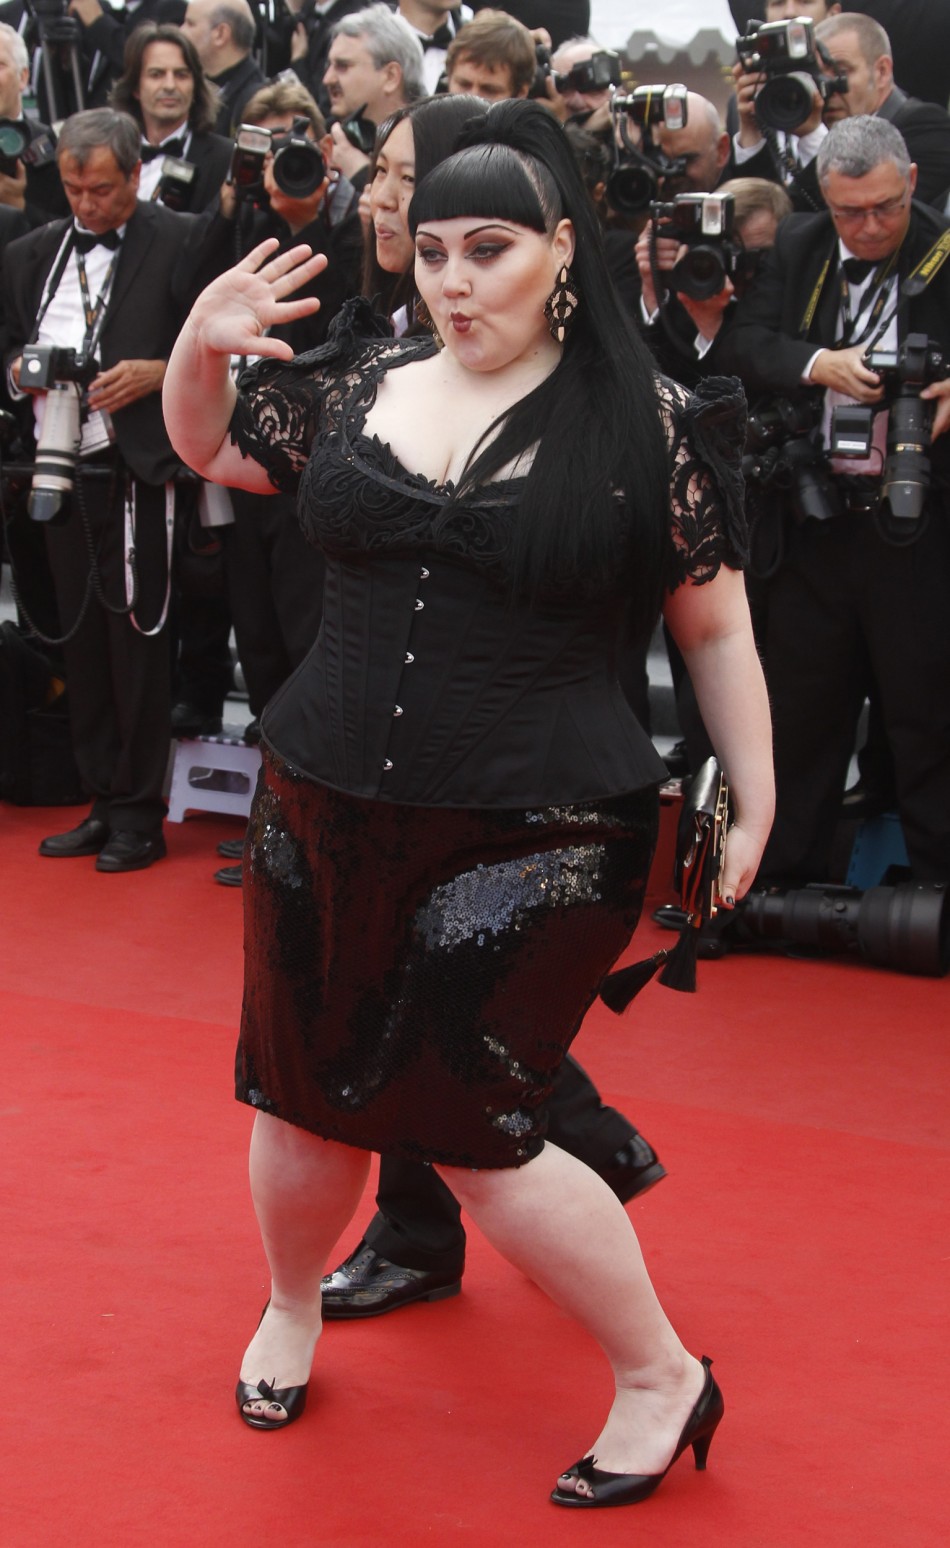 Singer Ditto arrives on the red carpet for the screening of the film De rouille et dos at the 65th Cannes Film Festival